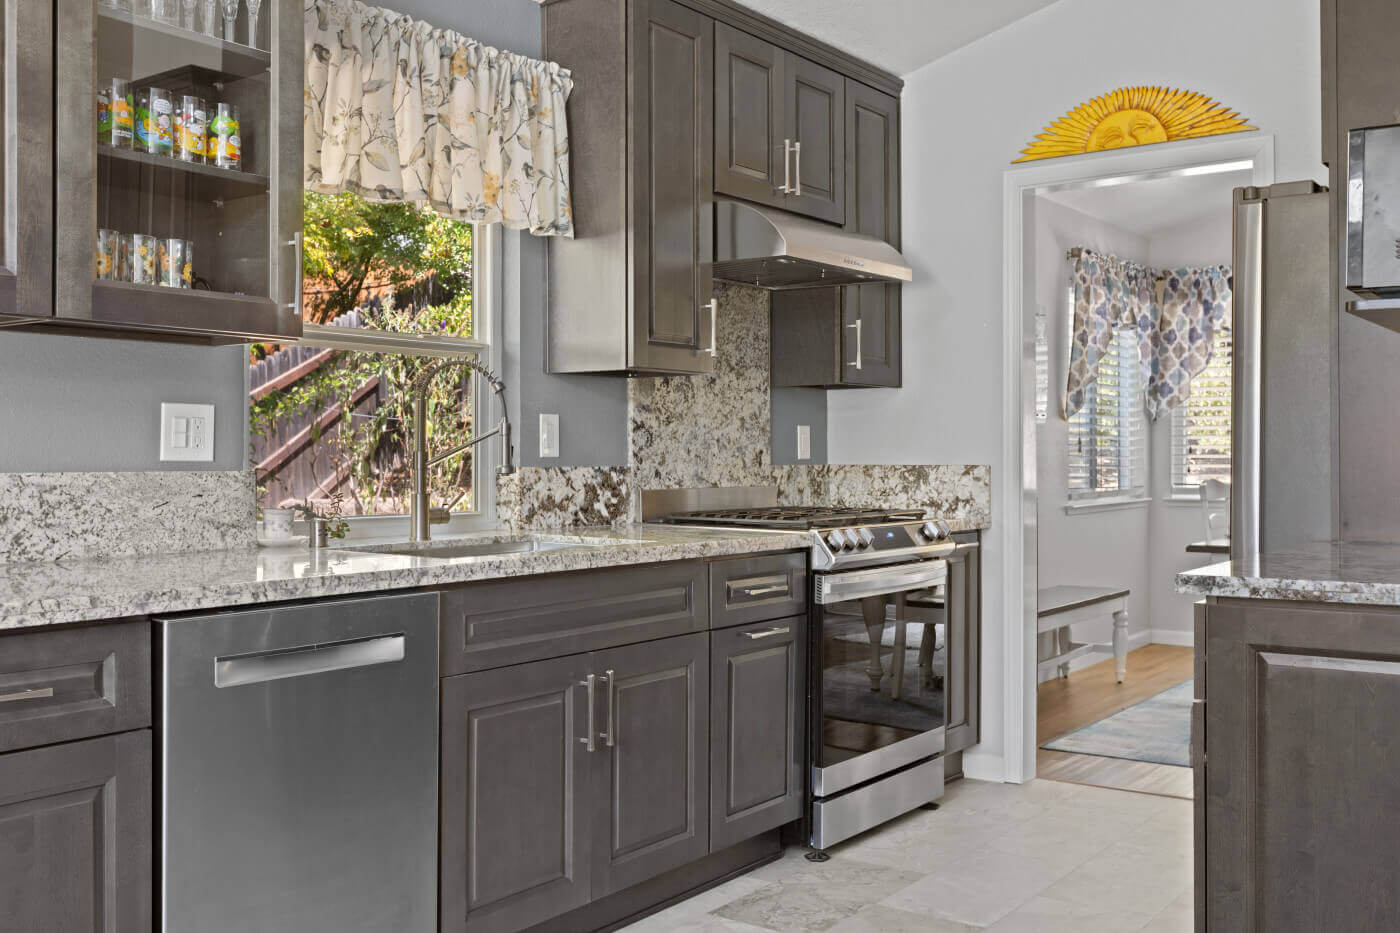 Modern kitchen interior with granite countertops and stainless steel appliances, framed by dark wood cabinetry and accented with a sunflower-themed wall decor above the doorway. The scene is brightened by natural light from a window adorned with bird-themed curtains.